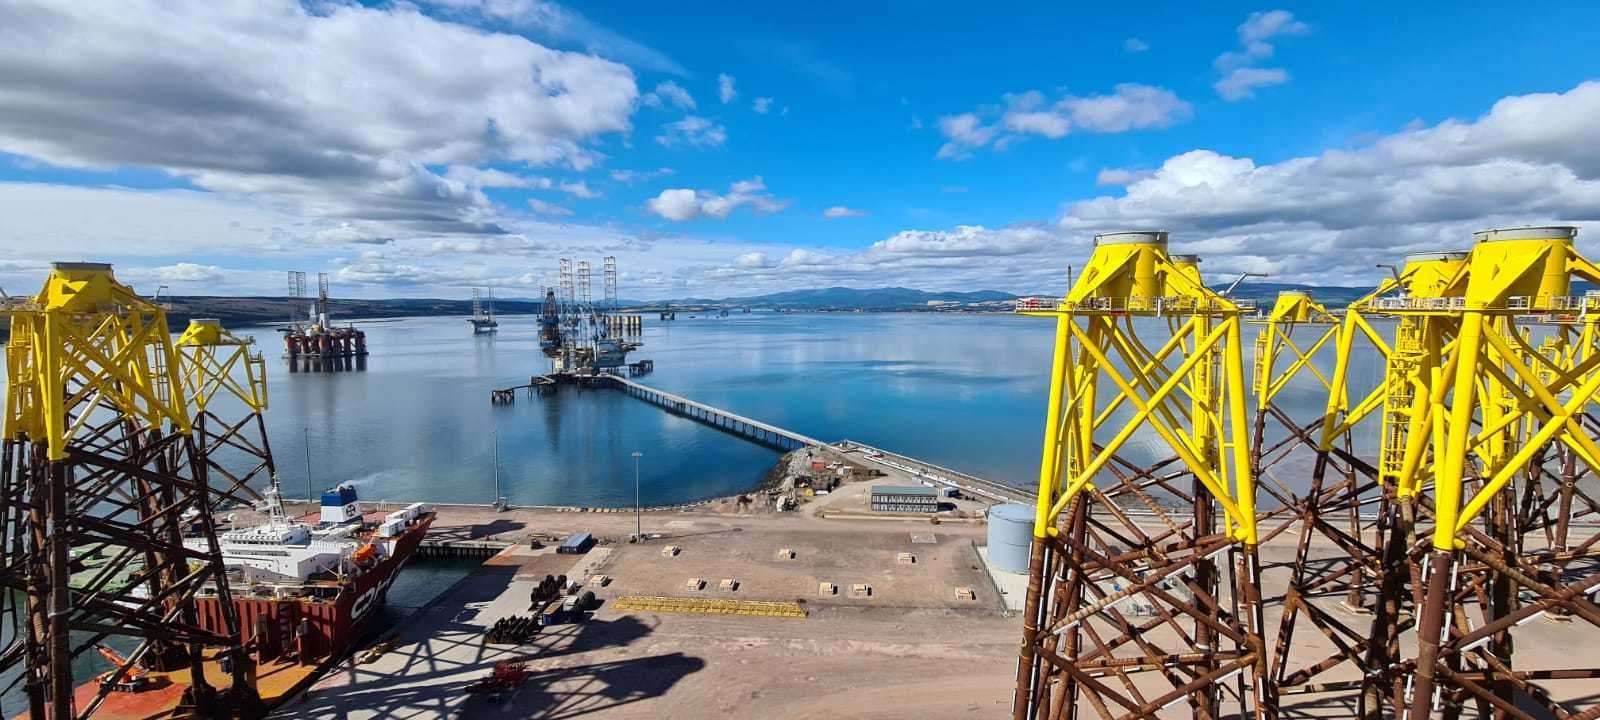 Moray East foundations being unloaded for temporary storage at Nigg Energy Park in 2020 with Cromarty Firth in the background.